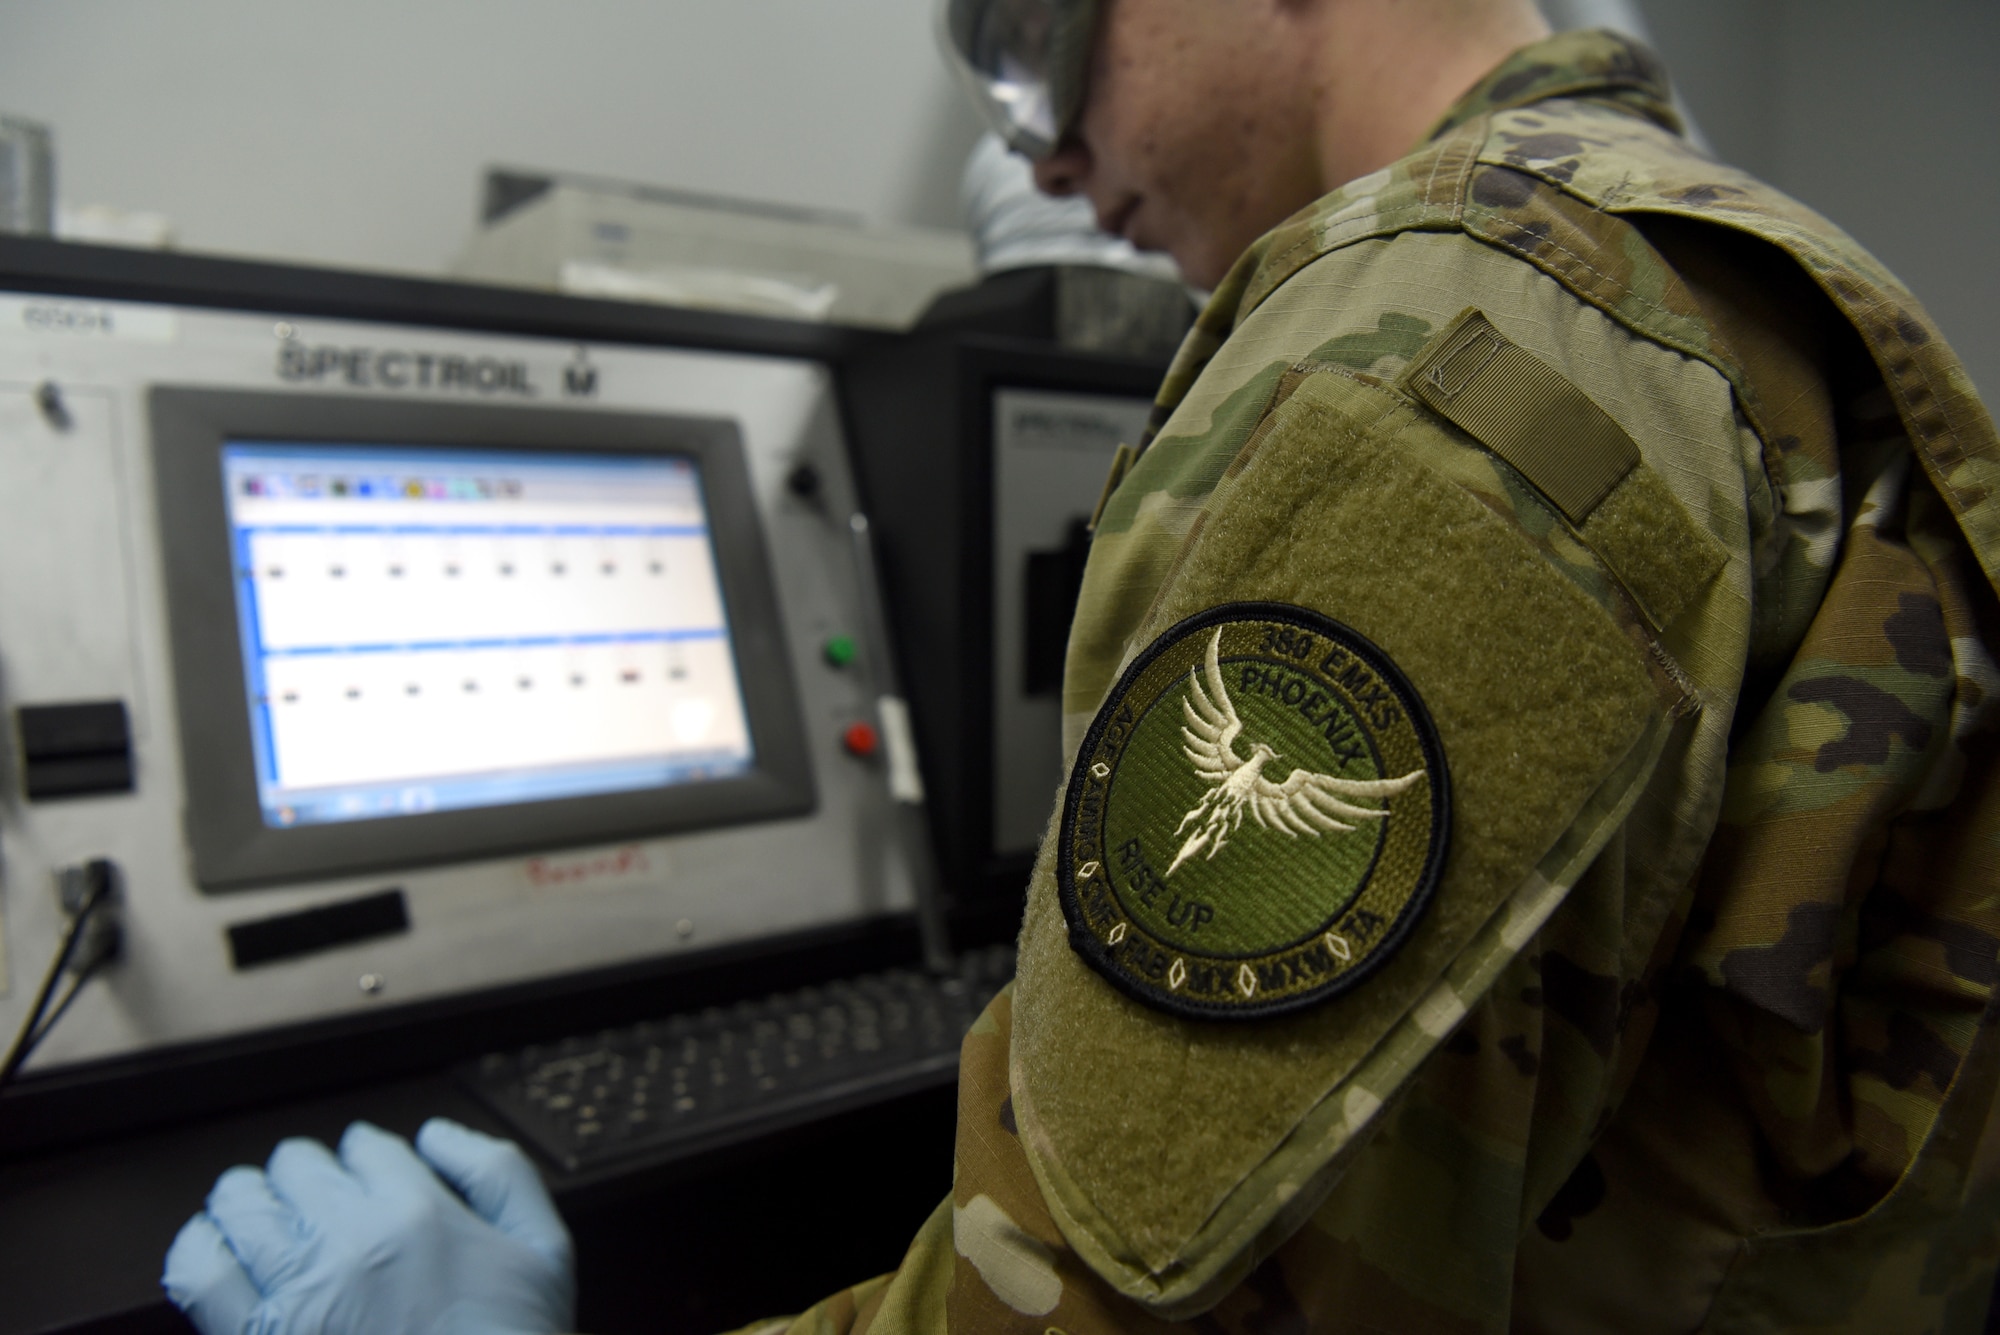 Senior Airman Jared Allen, 380th Expeditionary Maintenance Squadron Nondestructive Inspection journeyman, completes the cleanup of the spectrometer after running a Joint Oil Analysis Program, April 12, 2019, on Al Dhafra Air Base, United Arab Emirates.